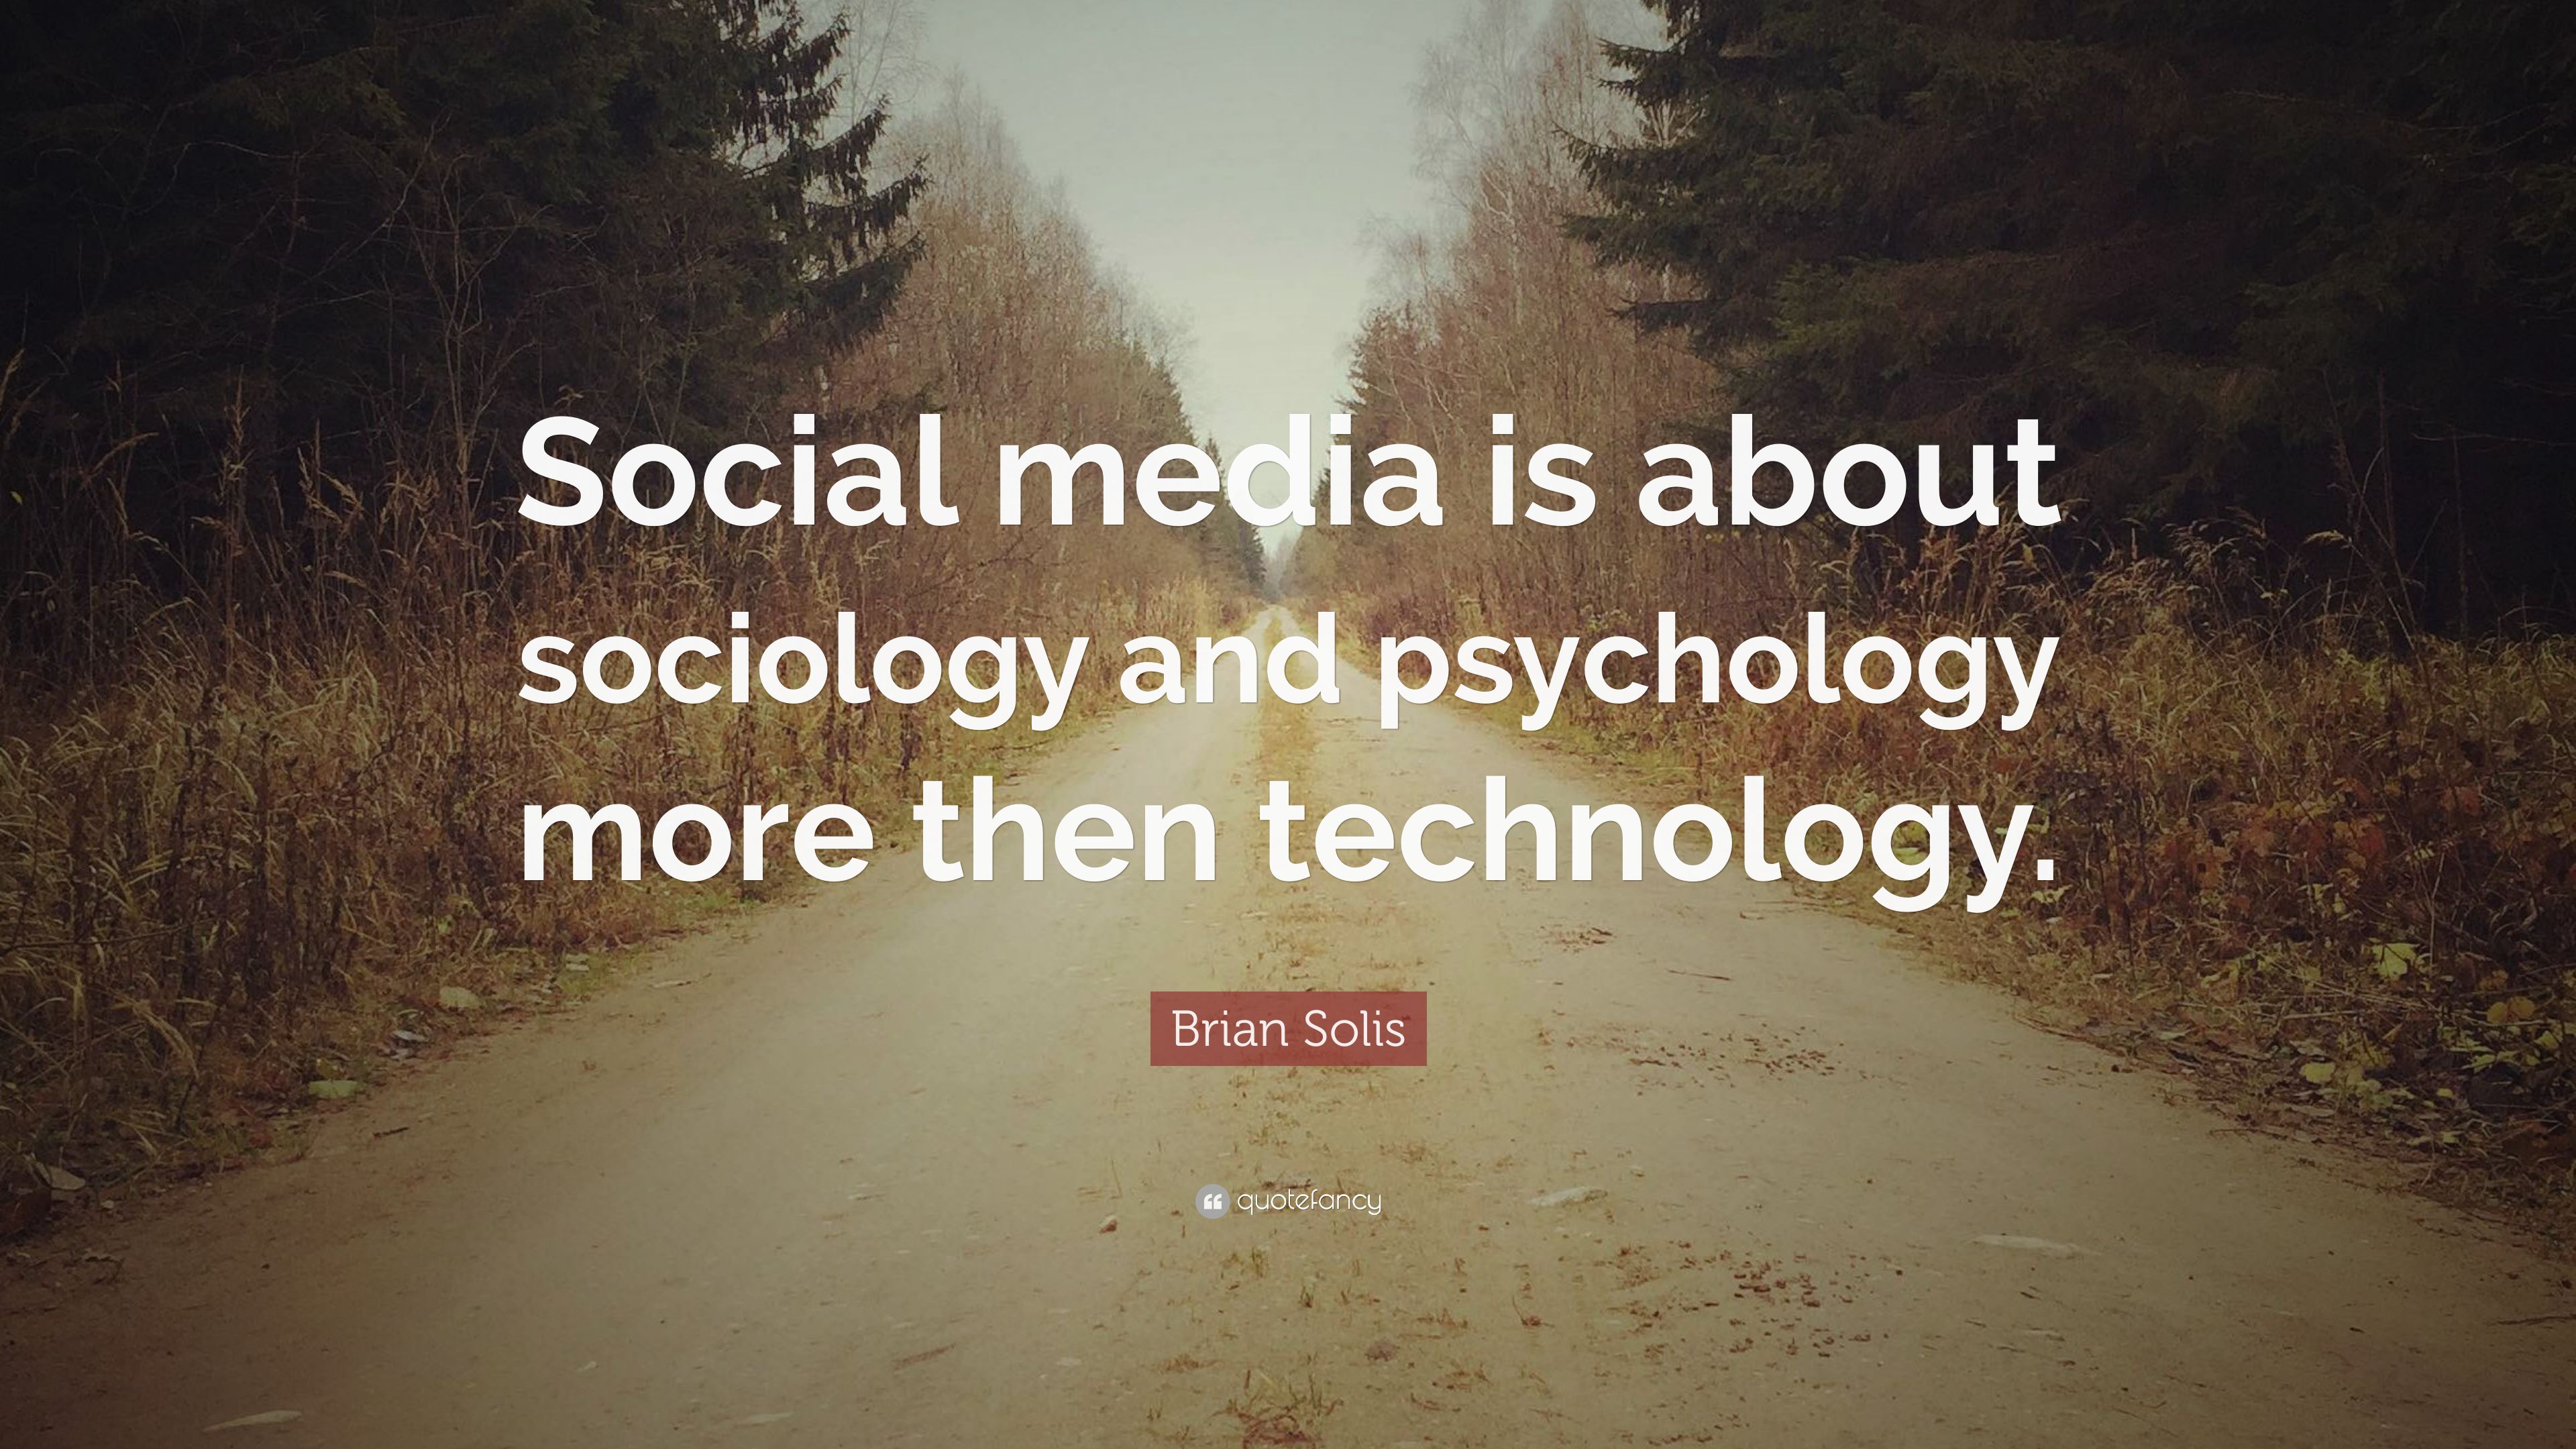 Brian Solis Quote: “Social media is about sociology and psychology more then technology.” (7 wallpaper)